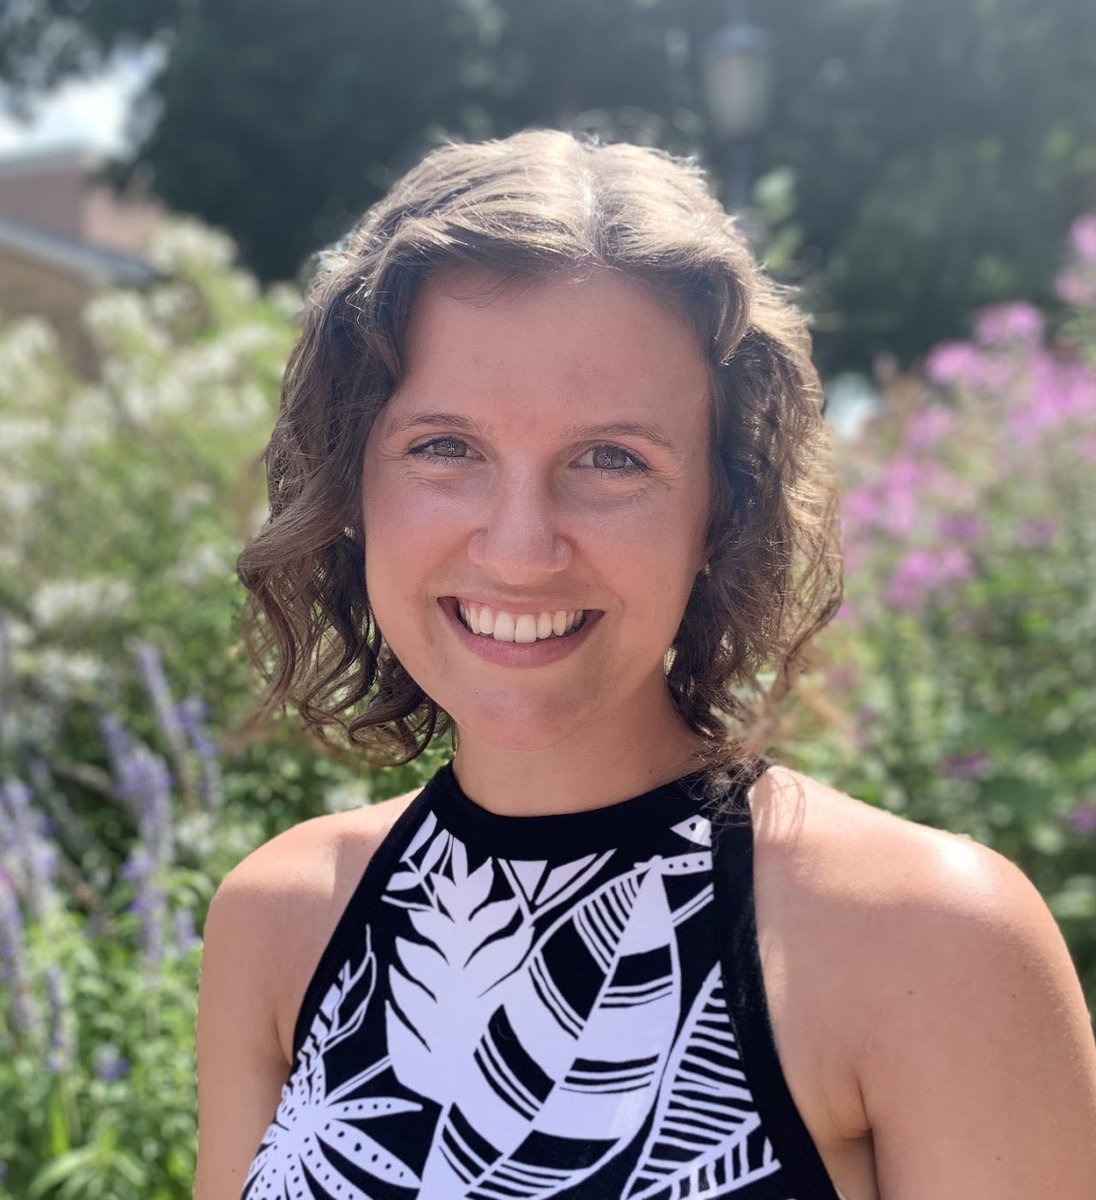 Next up is  @becca_vanhoeck! Becca is on our candidate relations team and is a Ph.D. student  @UNC_Biology and  @UNCims where she studies the sounds marine animals make to ask a variety of questions about marine ecosystems and fish populations 